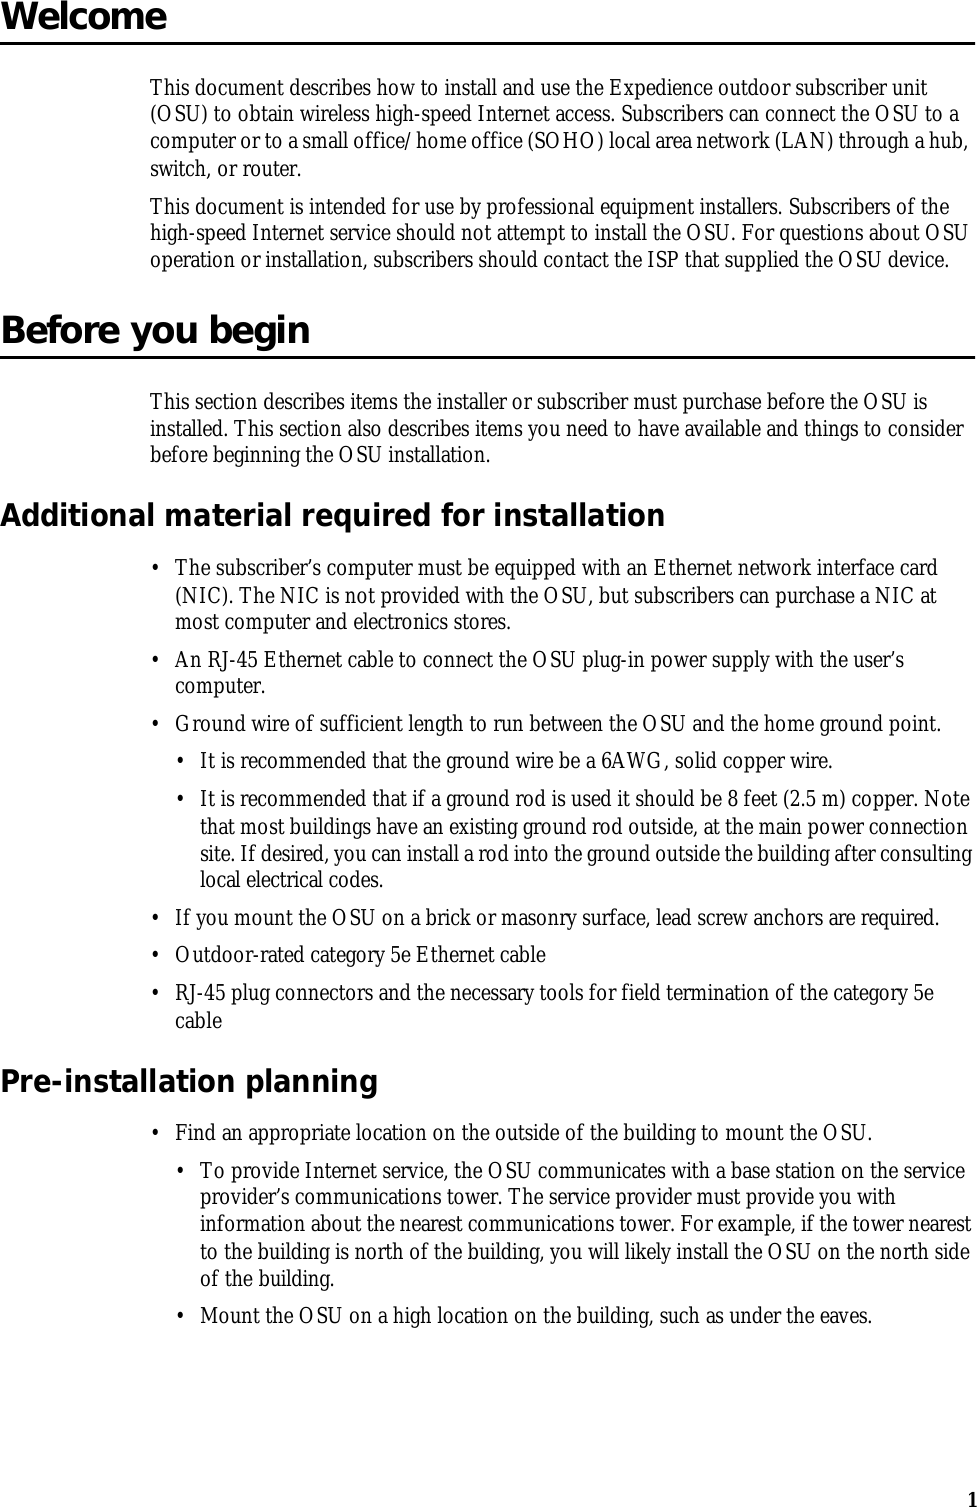 1WelcomeThis document describes how to install and use the Expedience outdoor subscriber unit (OSU) to obtain wireless high-speed Internet access. Subscribers can connect the OSU to a computer or to a small office/home office (SOHO) local area network (LAN) through a hub, switch, or router.This document is intended for use by professional equipment installers. Subscribers of the high-speed Internet service should not attempt to install the OSU. For questions about OSU operation or installation, subscribers should contact the ISP that supplied the OSU device. Before you beginThis section describes items the installer or subscriber must purchase before the OSU is installed. This section also describes items you need to have available and things to consider before beginning the OSU installation.Additional material required for installation•The subscriber’s computer must be equipped with an Ethernet network interface card (NIC). The NIC is not provided with the OSU, but subscribers can purchase a NIC at most computer and electronics stores.•An RJ-45 Ethernet cable to connect the OSU plug-in power supply with the user’s computer.•Ground wire of sufficient length to run between the OSU and the home ground point. •It is recommended that the ground wire be a 6AWG, solid copper wire.•It is recommended that if a ground rod is used it should be 8 feet (2.5 m) copper. Note that most buildings have an existing ground rod outside, at the main power connection site. If desired, you can install a rod into the ground outside the building after consulting local electrical codes. •If you mount the OSU on a brick or masonry surface, lead screw anchors are required. •Outdoor-rated category 5e Ethernet cable•RJ-45 plug connectors and the necessary tools for field termination of the category 5e cablePre-installation planning•Find an appropriate location on the outside of the building to mount the OSU. •To provide Internet service, the OSU communicates with a base station on the service provider’s communications tower. The service provider must provide you with information about the nearest communications tower. For example, if the tower nearest to the building is north of the building, you will likely install the OSU on the north side of the building.•Mount the OSU on a high location on the building, such as under the eaves. 